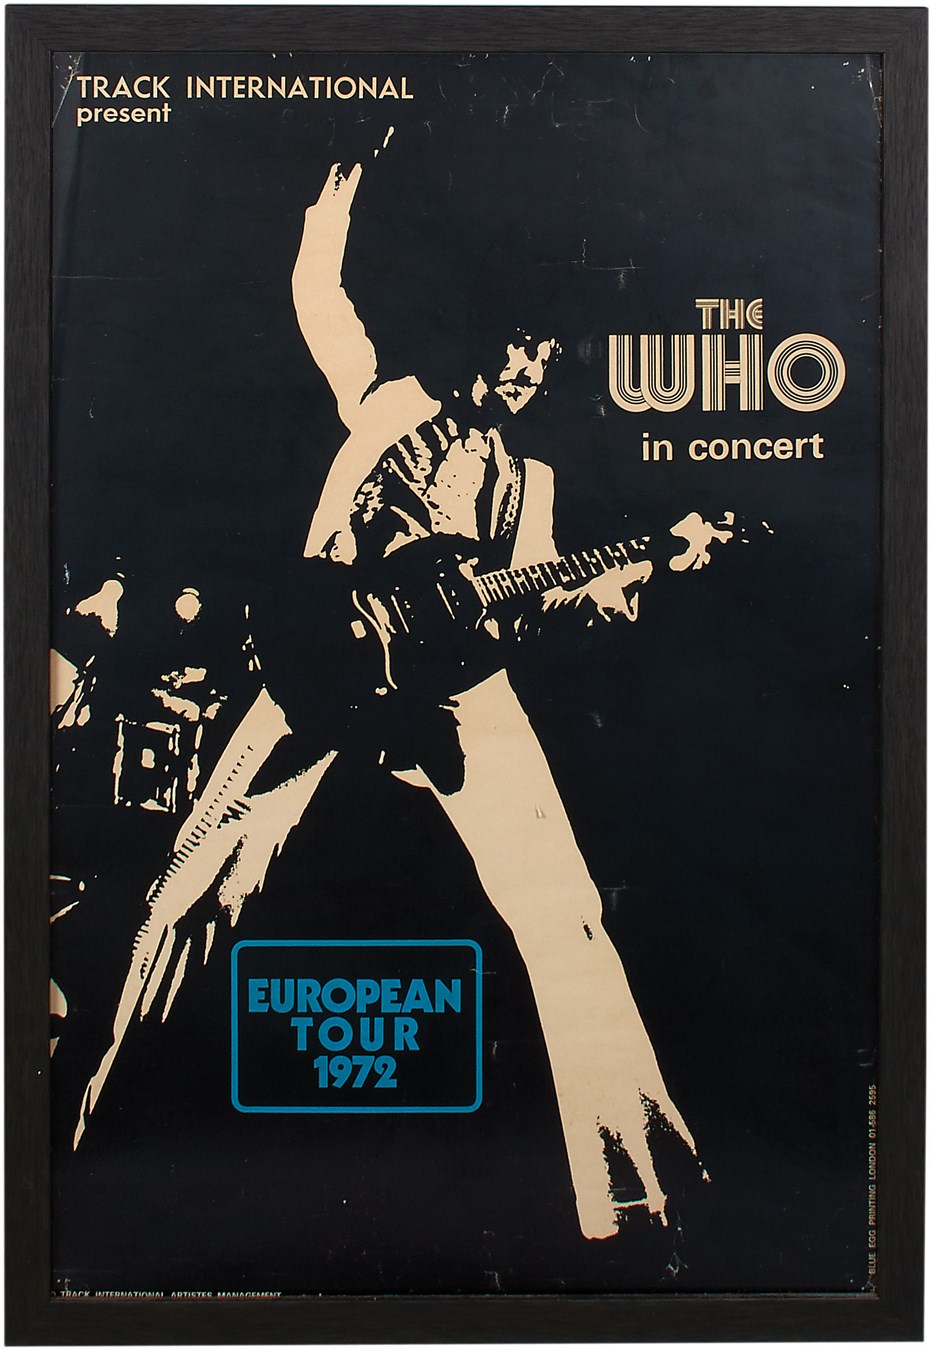 Rock 'N' Roll - 1972 The Who European Tour Poster